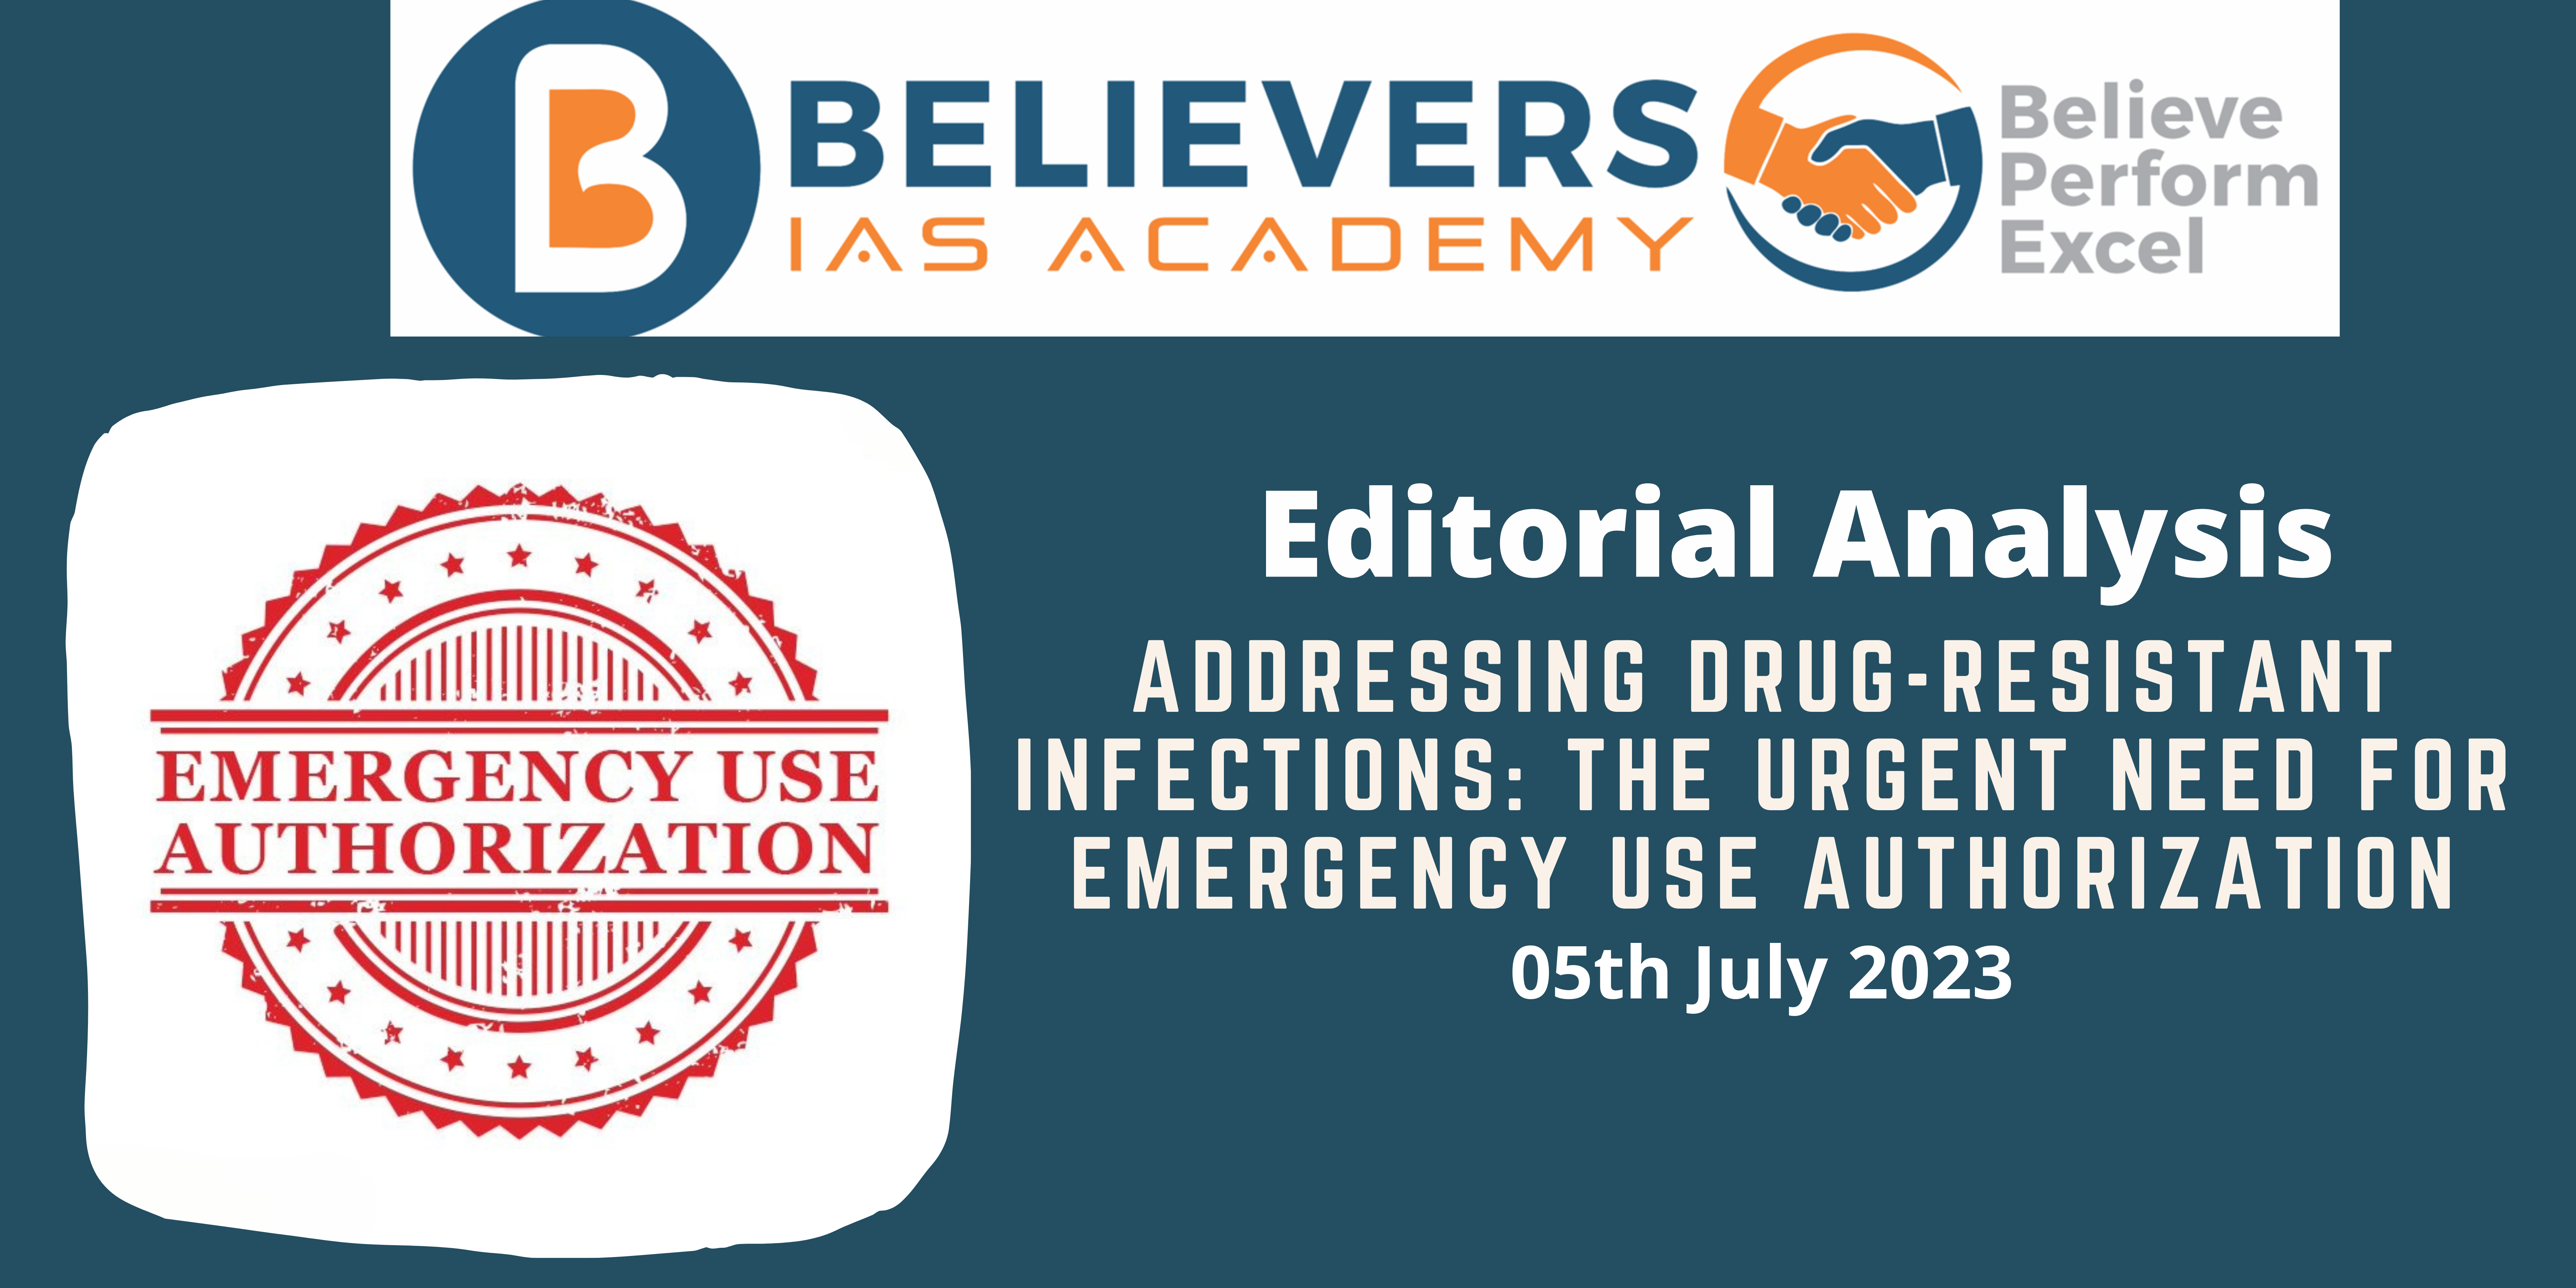 Addressing Drug-Resistant Infections: The Urgent Need for Emergency Use Authorization